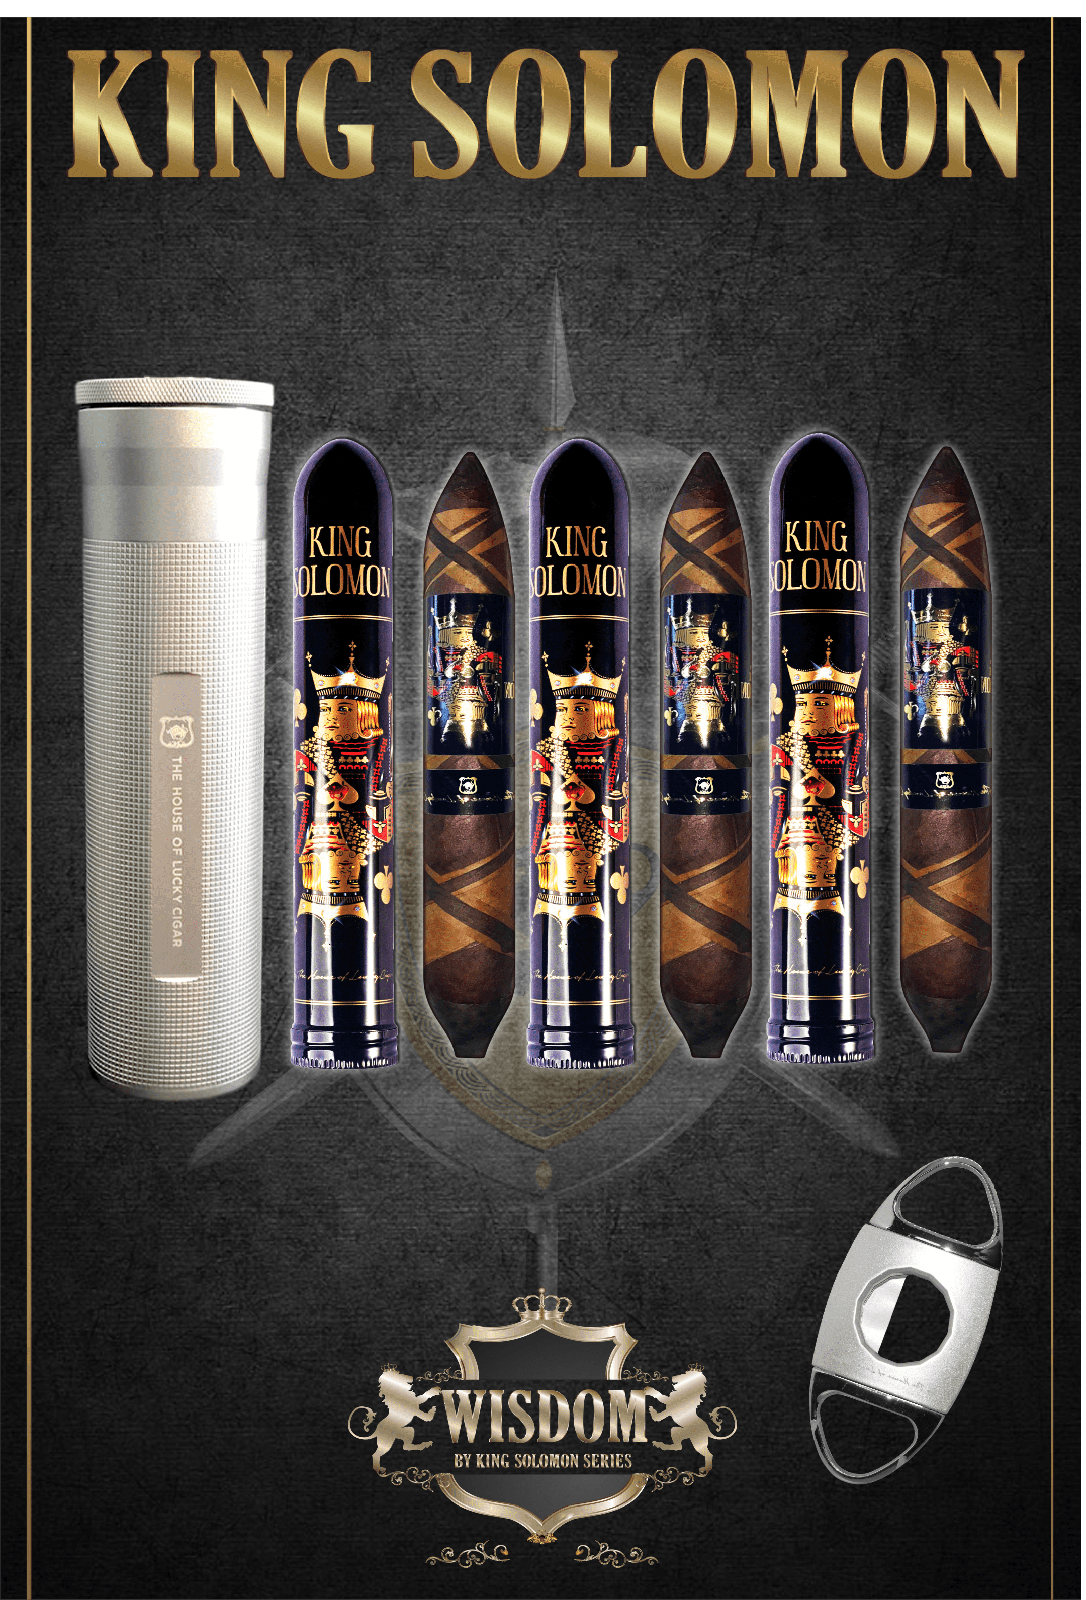 From The King Solomon Series: 3 Solomon 7x60 Cigars with Cutter and Travel Humidor Set